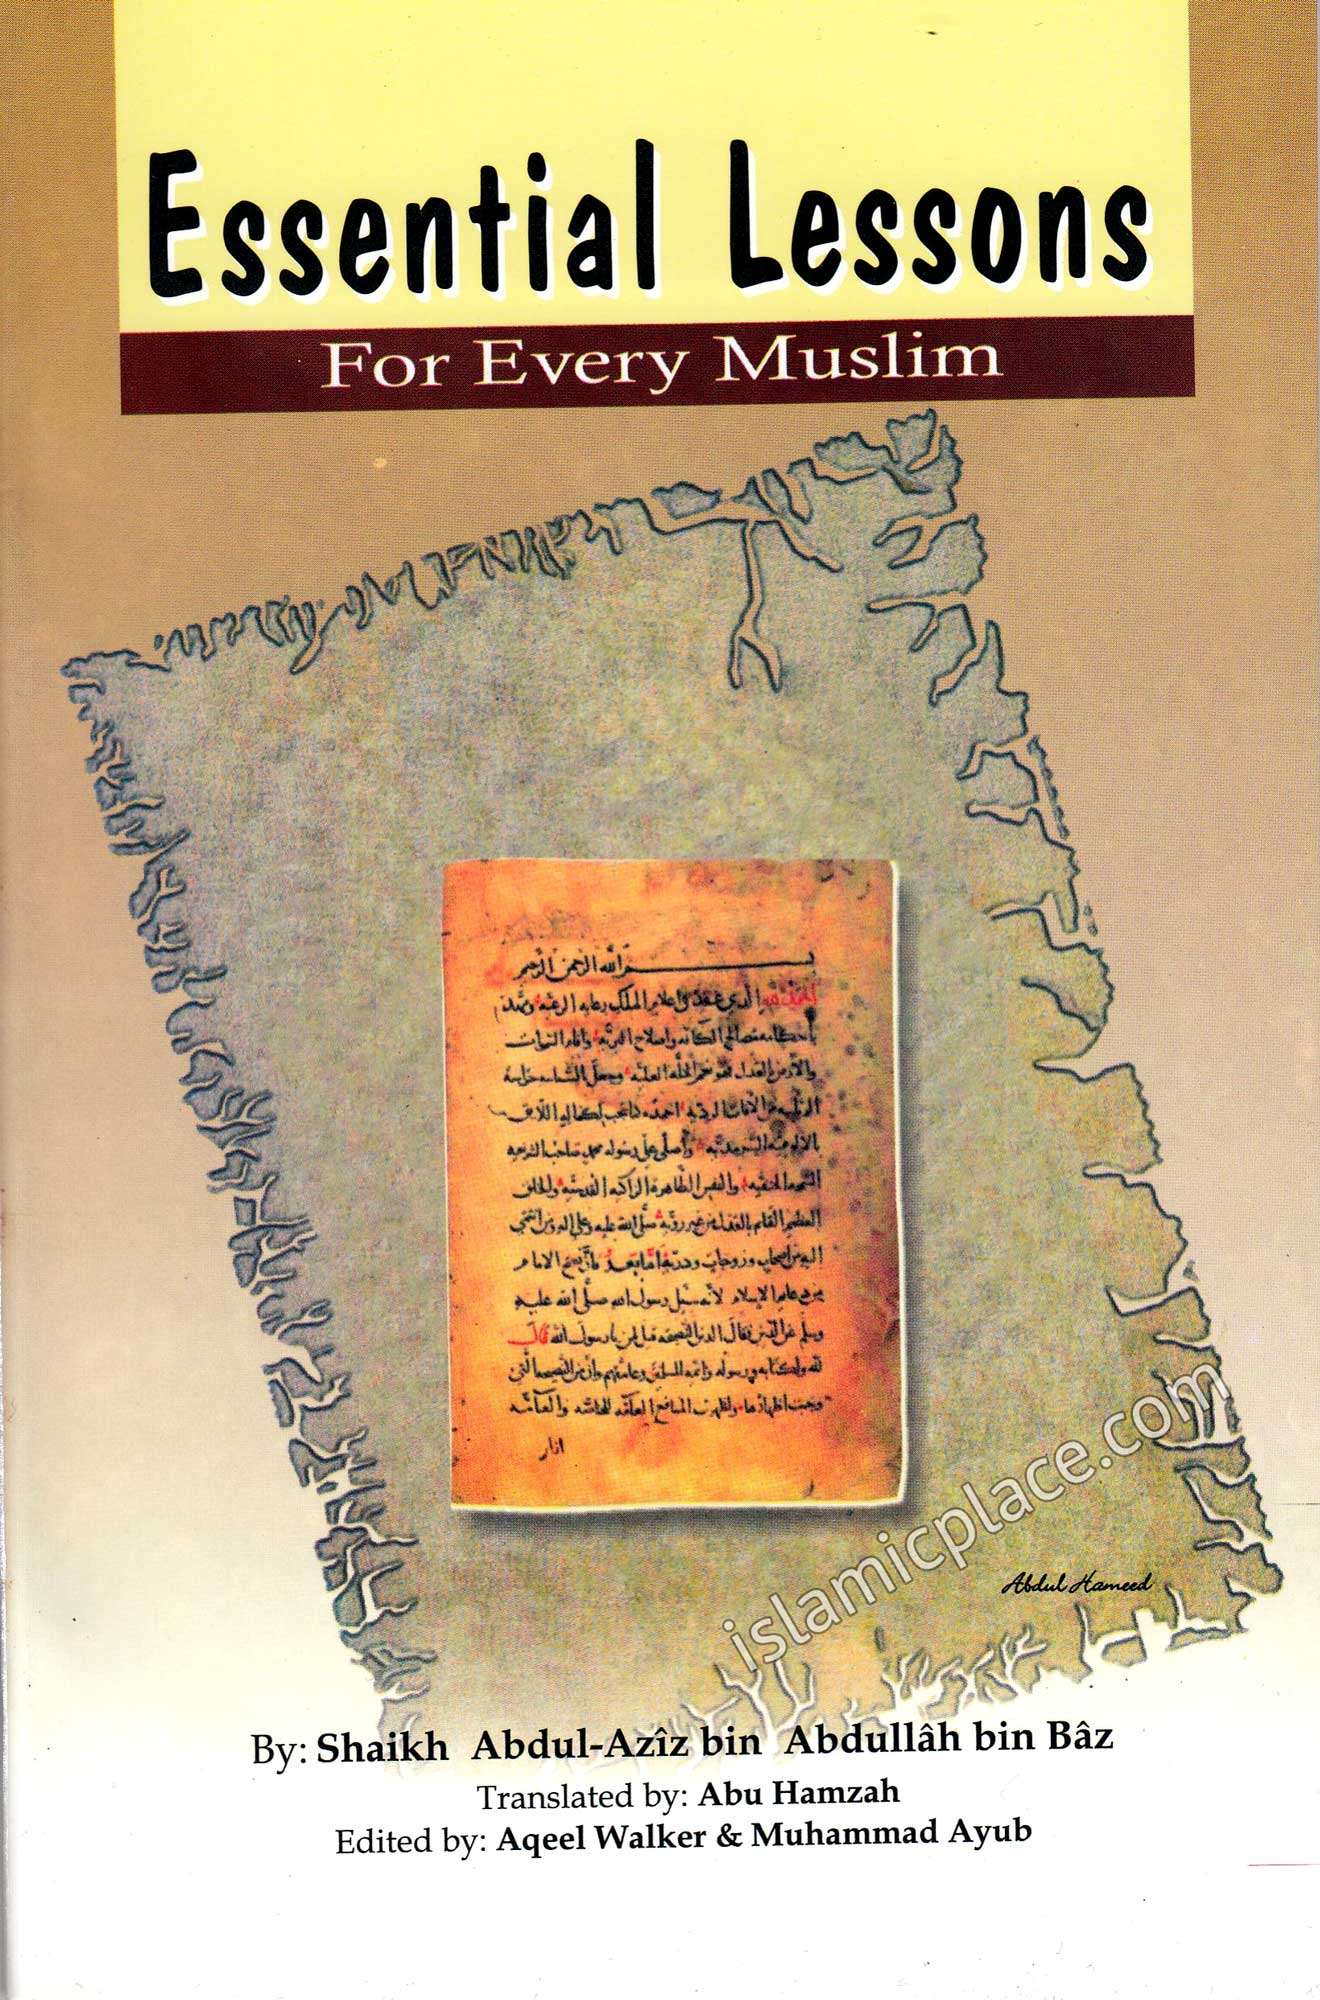 Essential Lessons for Every Muslim